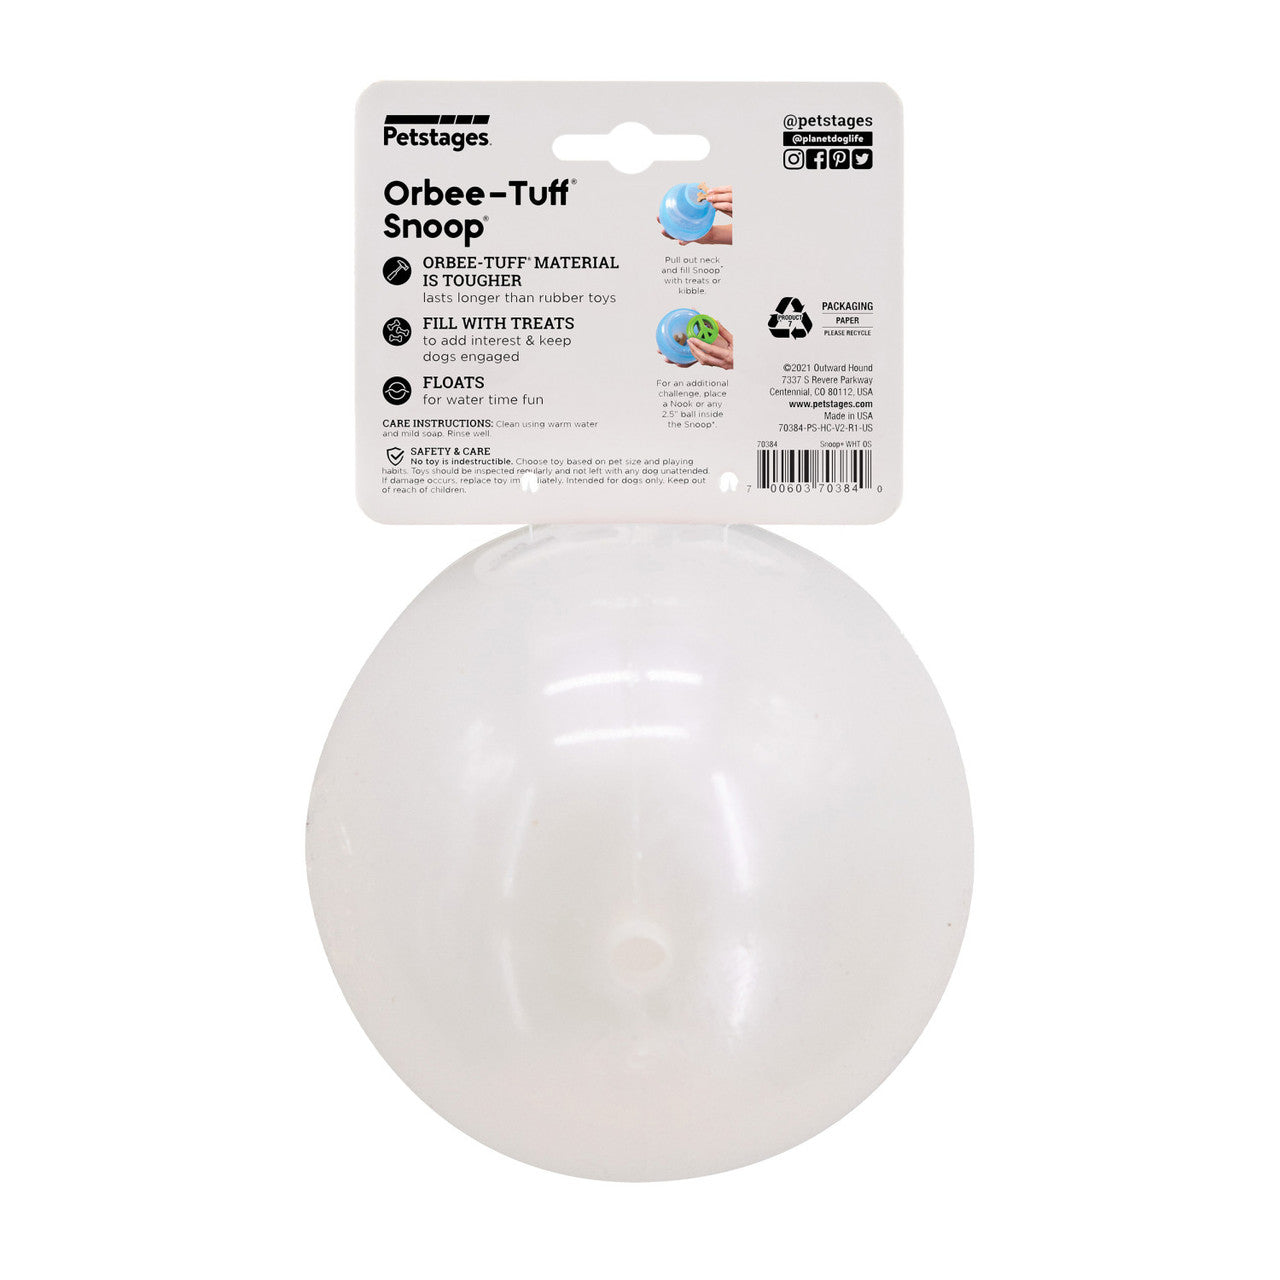 Snoop is a translucent and pliable ball with a deep crevice that conceals treats. Dogs will need to pounce, nudge, nose, and nibble the ball to release the treats hidden inside. This interactive puzzle toy keeps dogs engaged, drives brain stimulation, and promotes self-play.